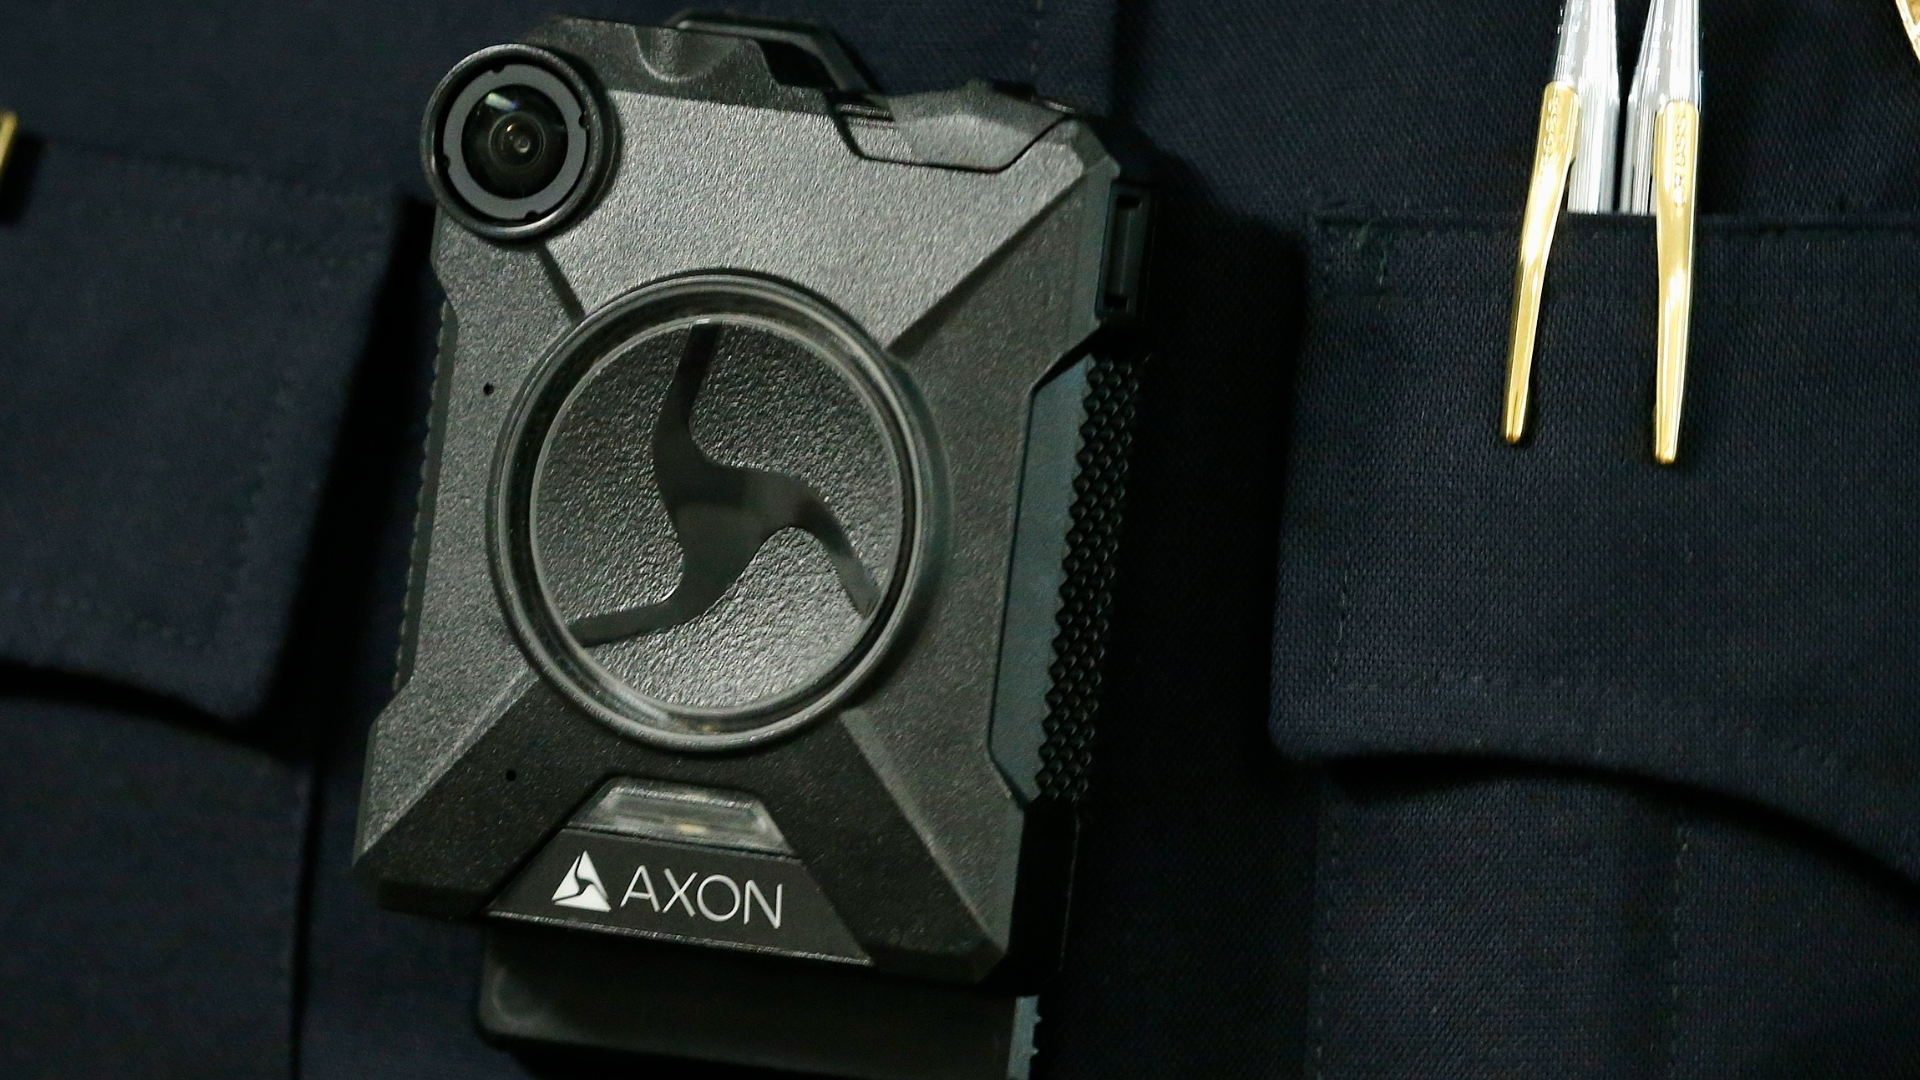 We found 12 out of 15 major law enforcement agencies do not have body cams. Only one agency had dash cams on all its cruisers.